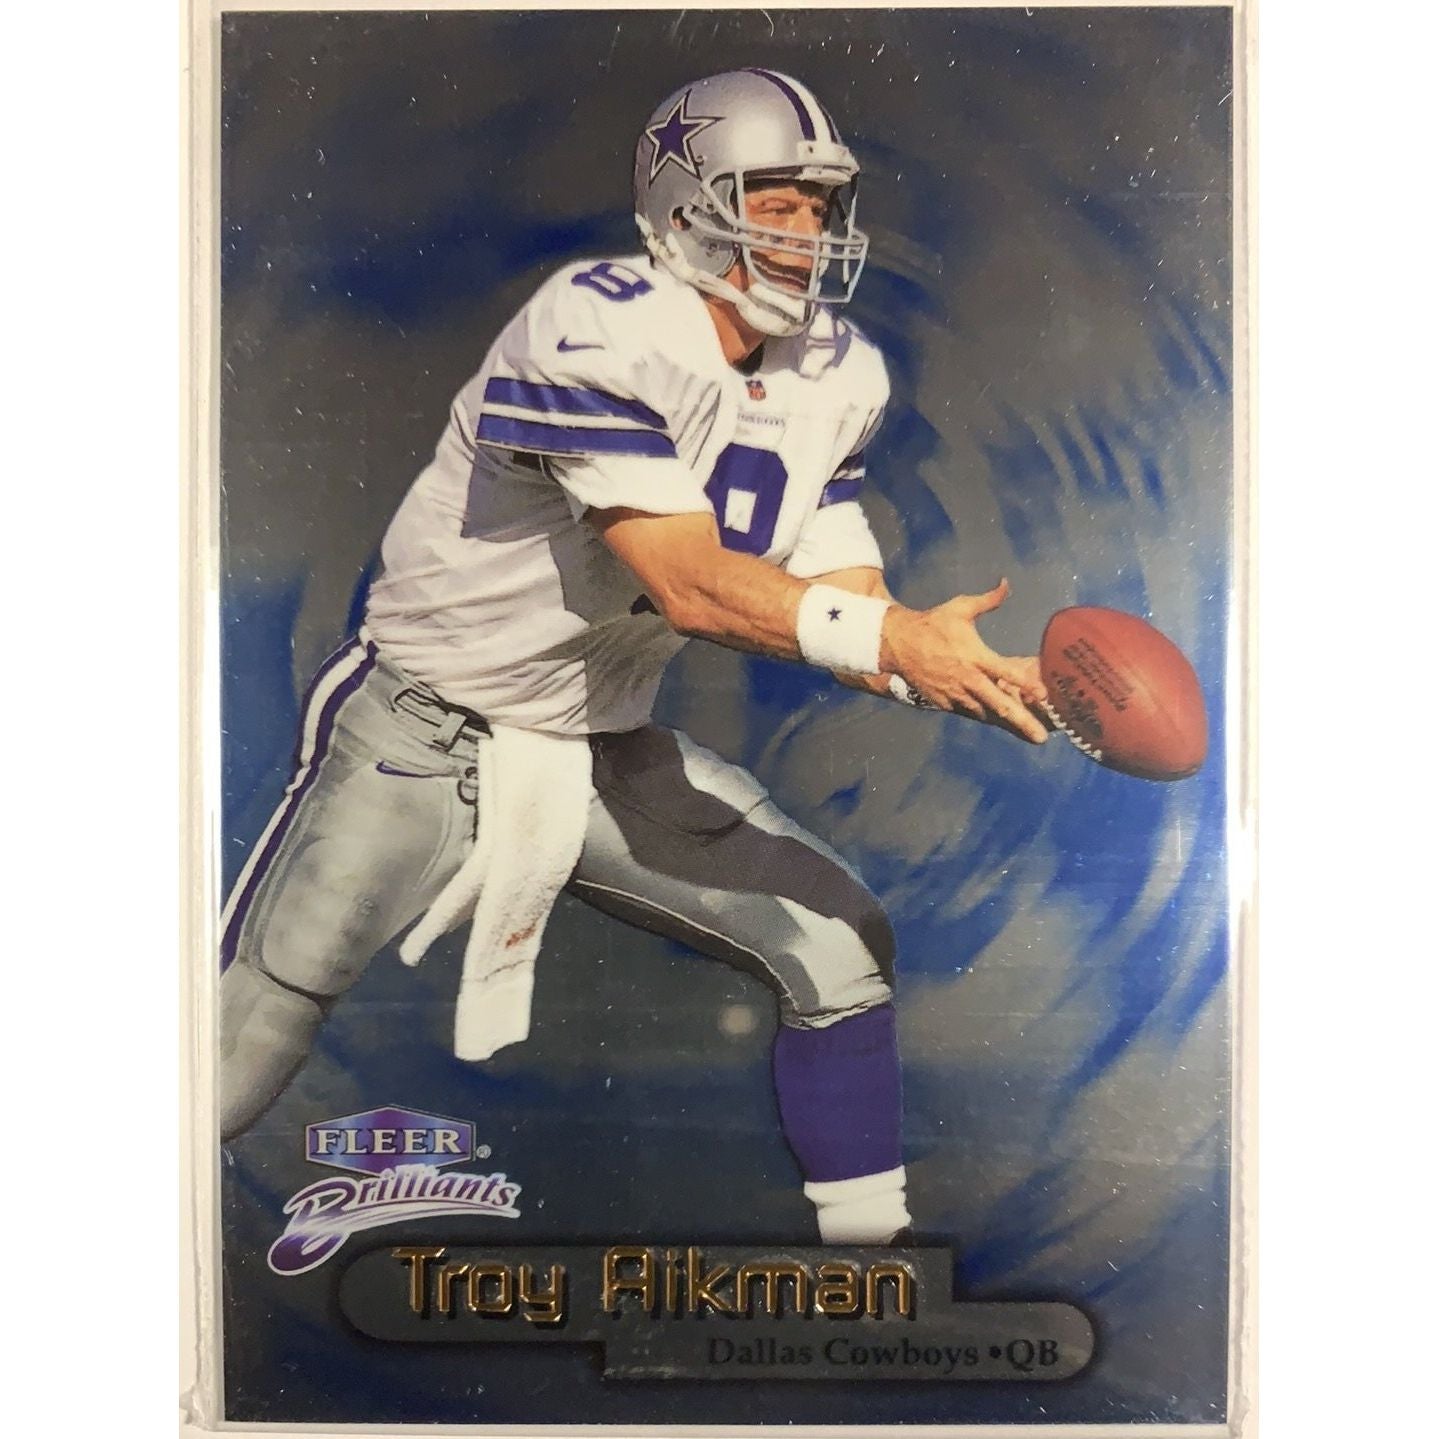  1998 Fleer Brilliants Troy Aikman 32b  Local Legends Cards & Collectibles